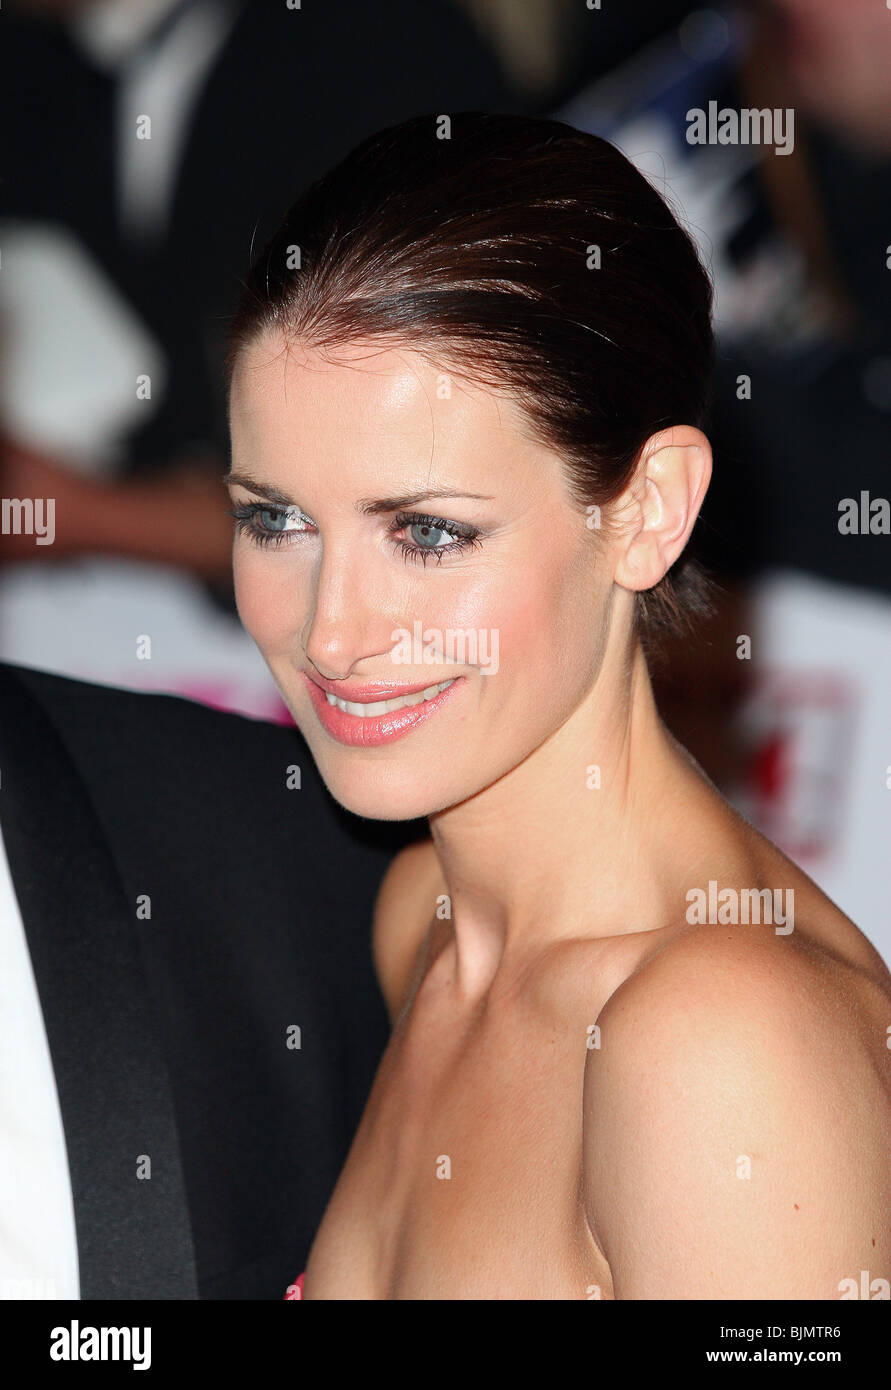 KIRSTY GALLAGHER NATIONAL TELEVISION AWARDS 2008 THE ROYAL ALBERT HALL LONDON ENGLAND 29 October 2008 Stock Photo